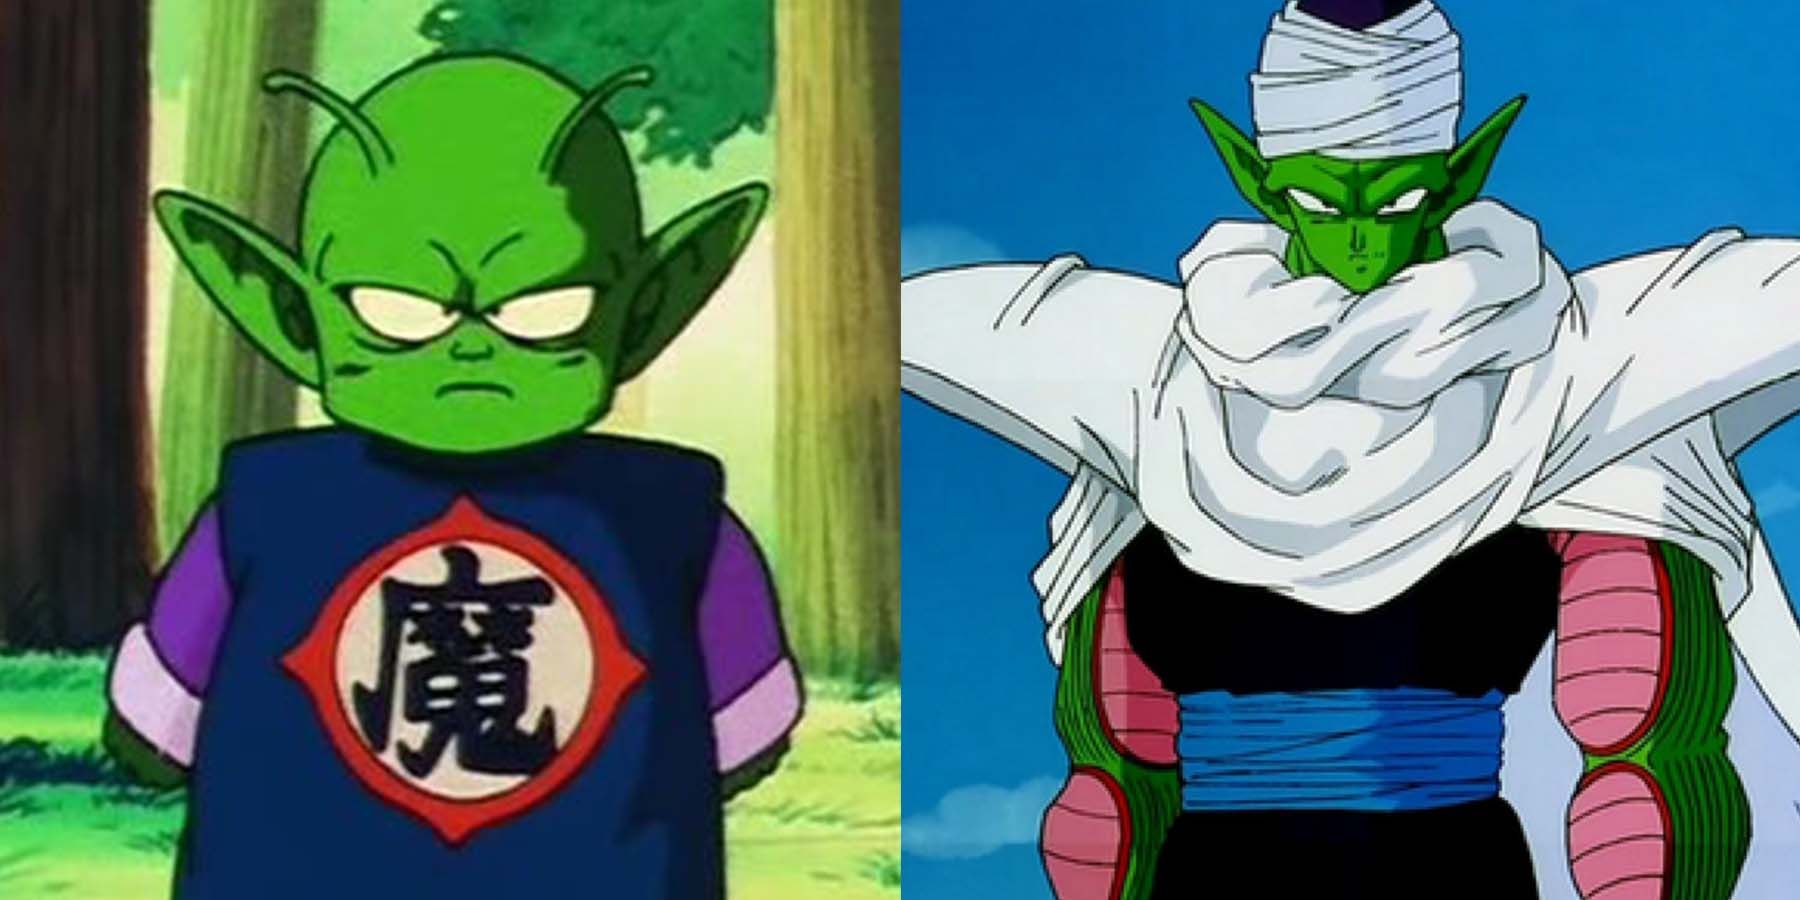 The Piccolo-Down: 15 Weird Facts About Piccolo's Body